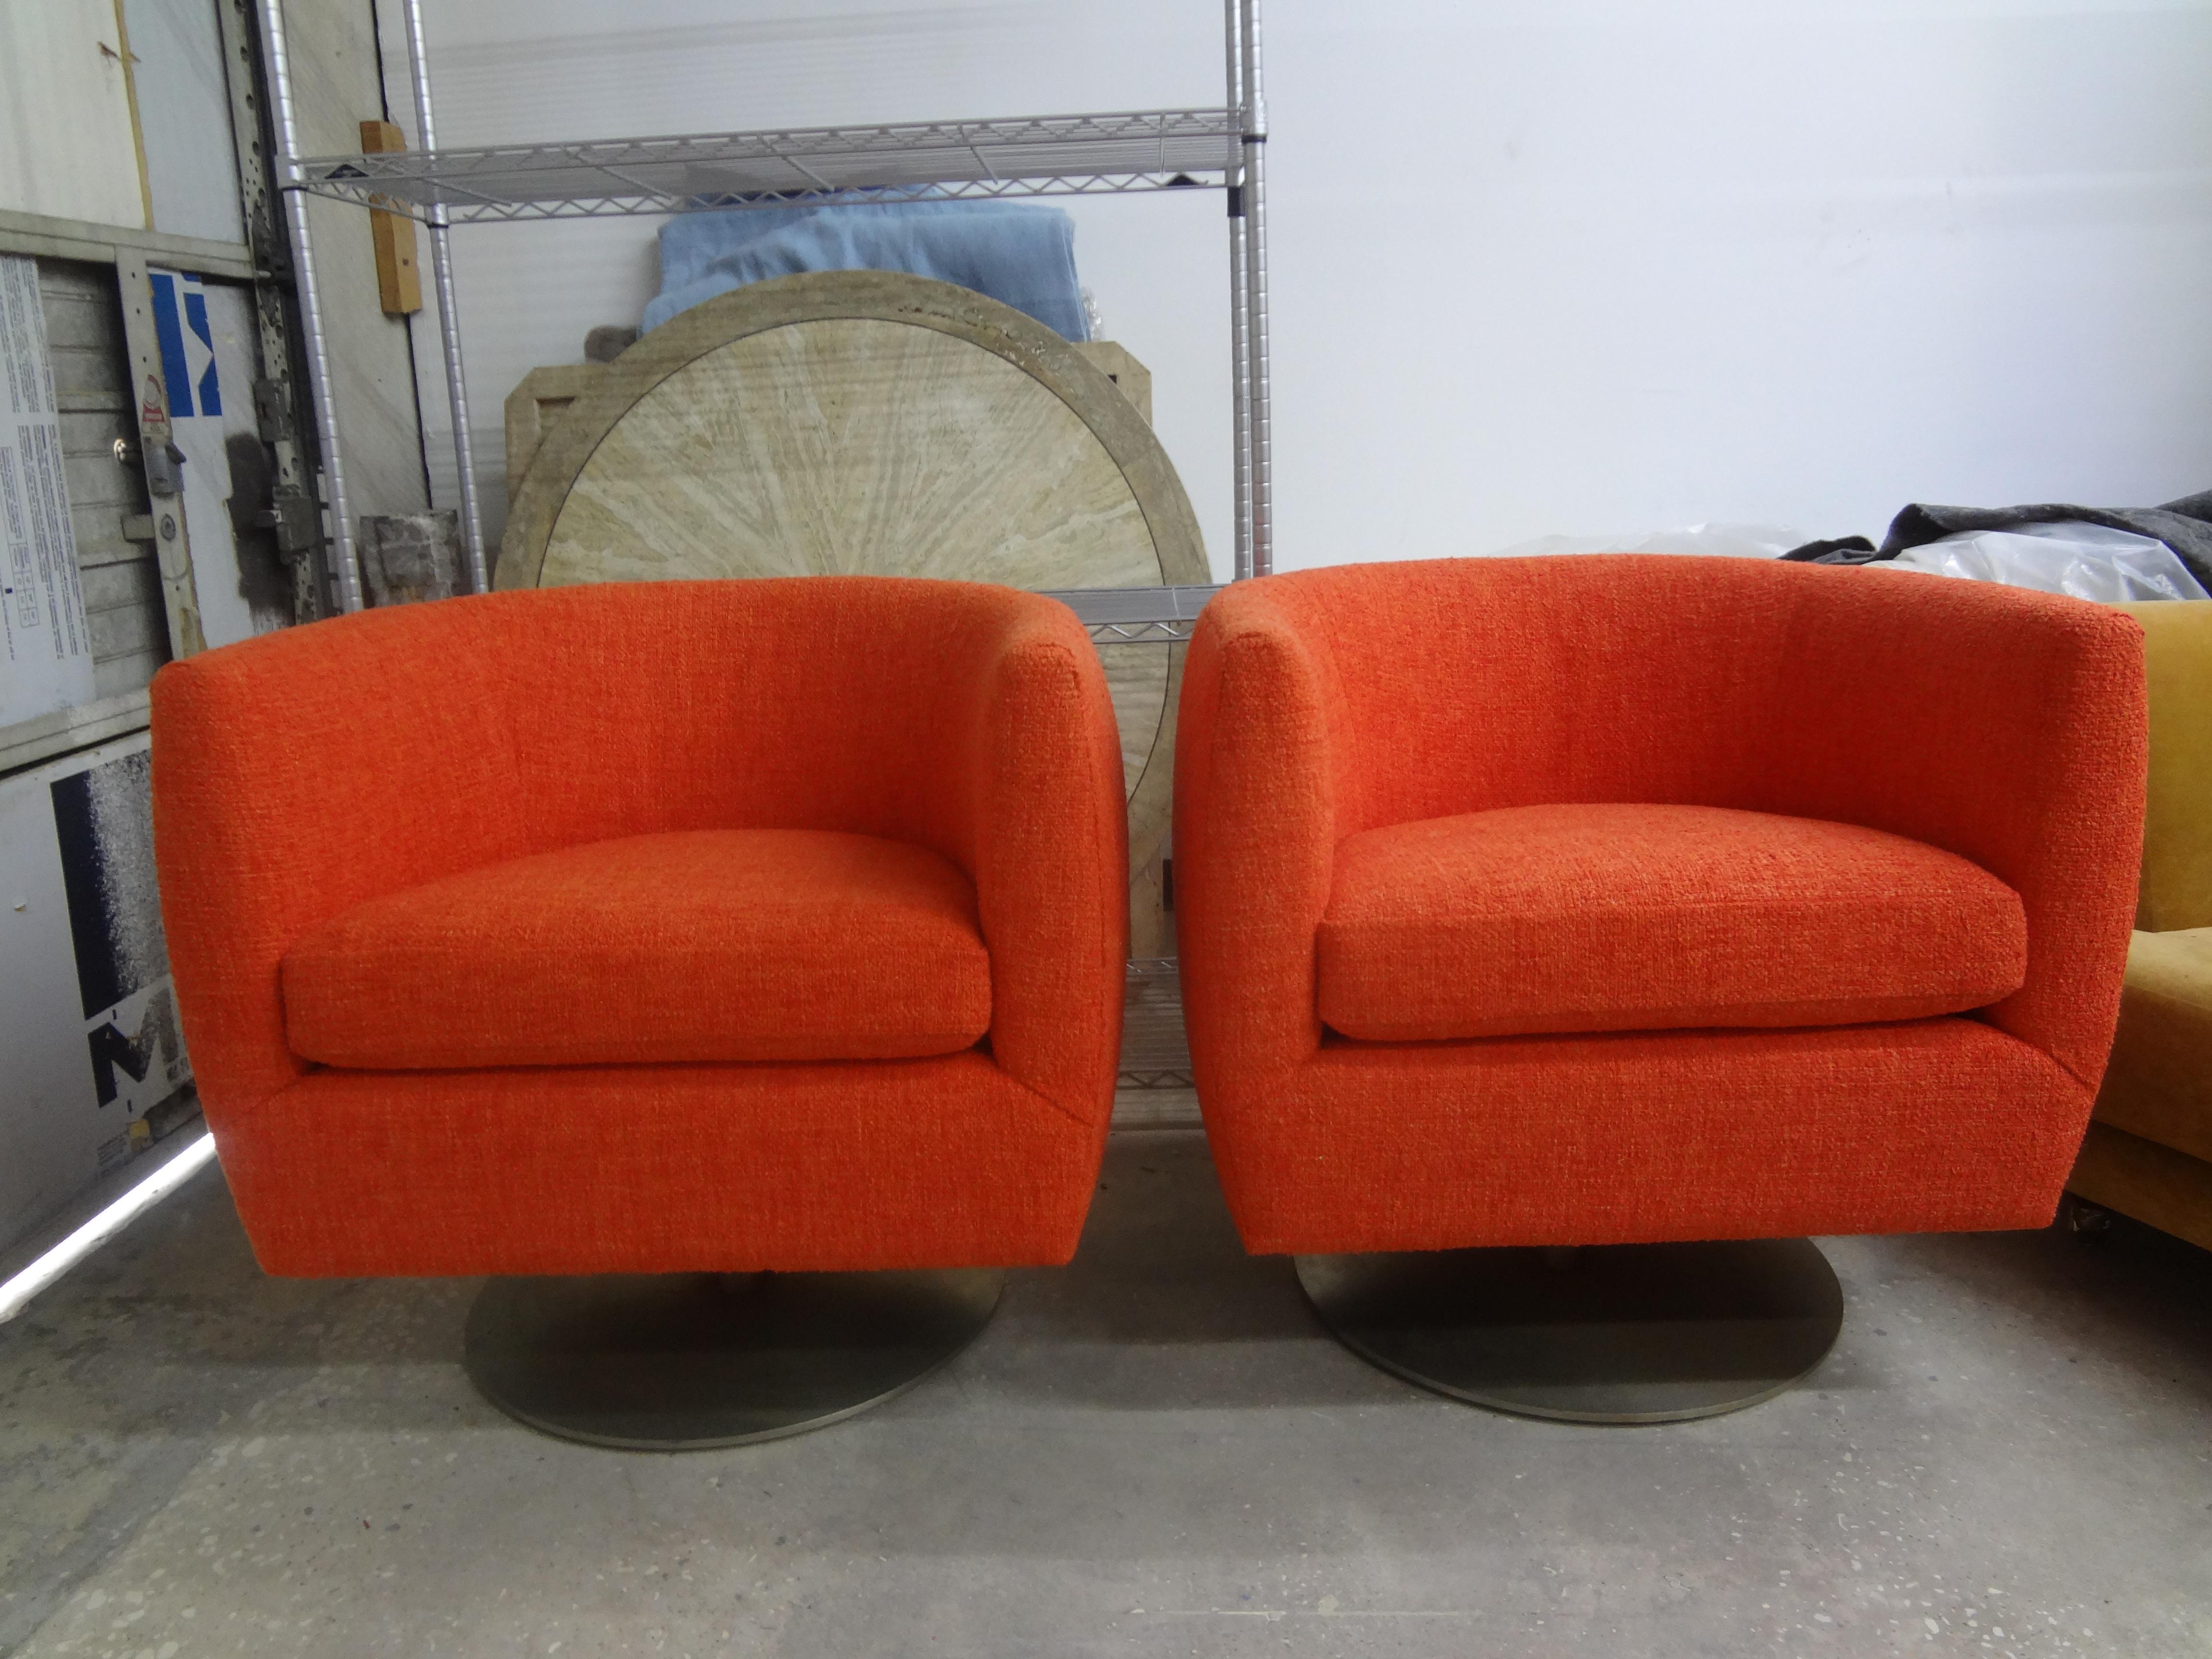 Stunning comfortable pair of Mid-Century Modern Vladimir Kagan style barrel back swivel chairs. These beautifully constructed Vladimir Kagan-Milo Baughman style swivel chairs have a very heavy steel base and have been newly upholstered in orange